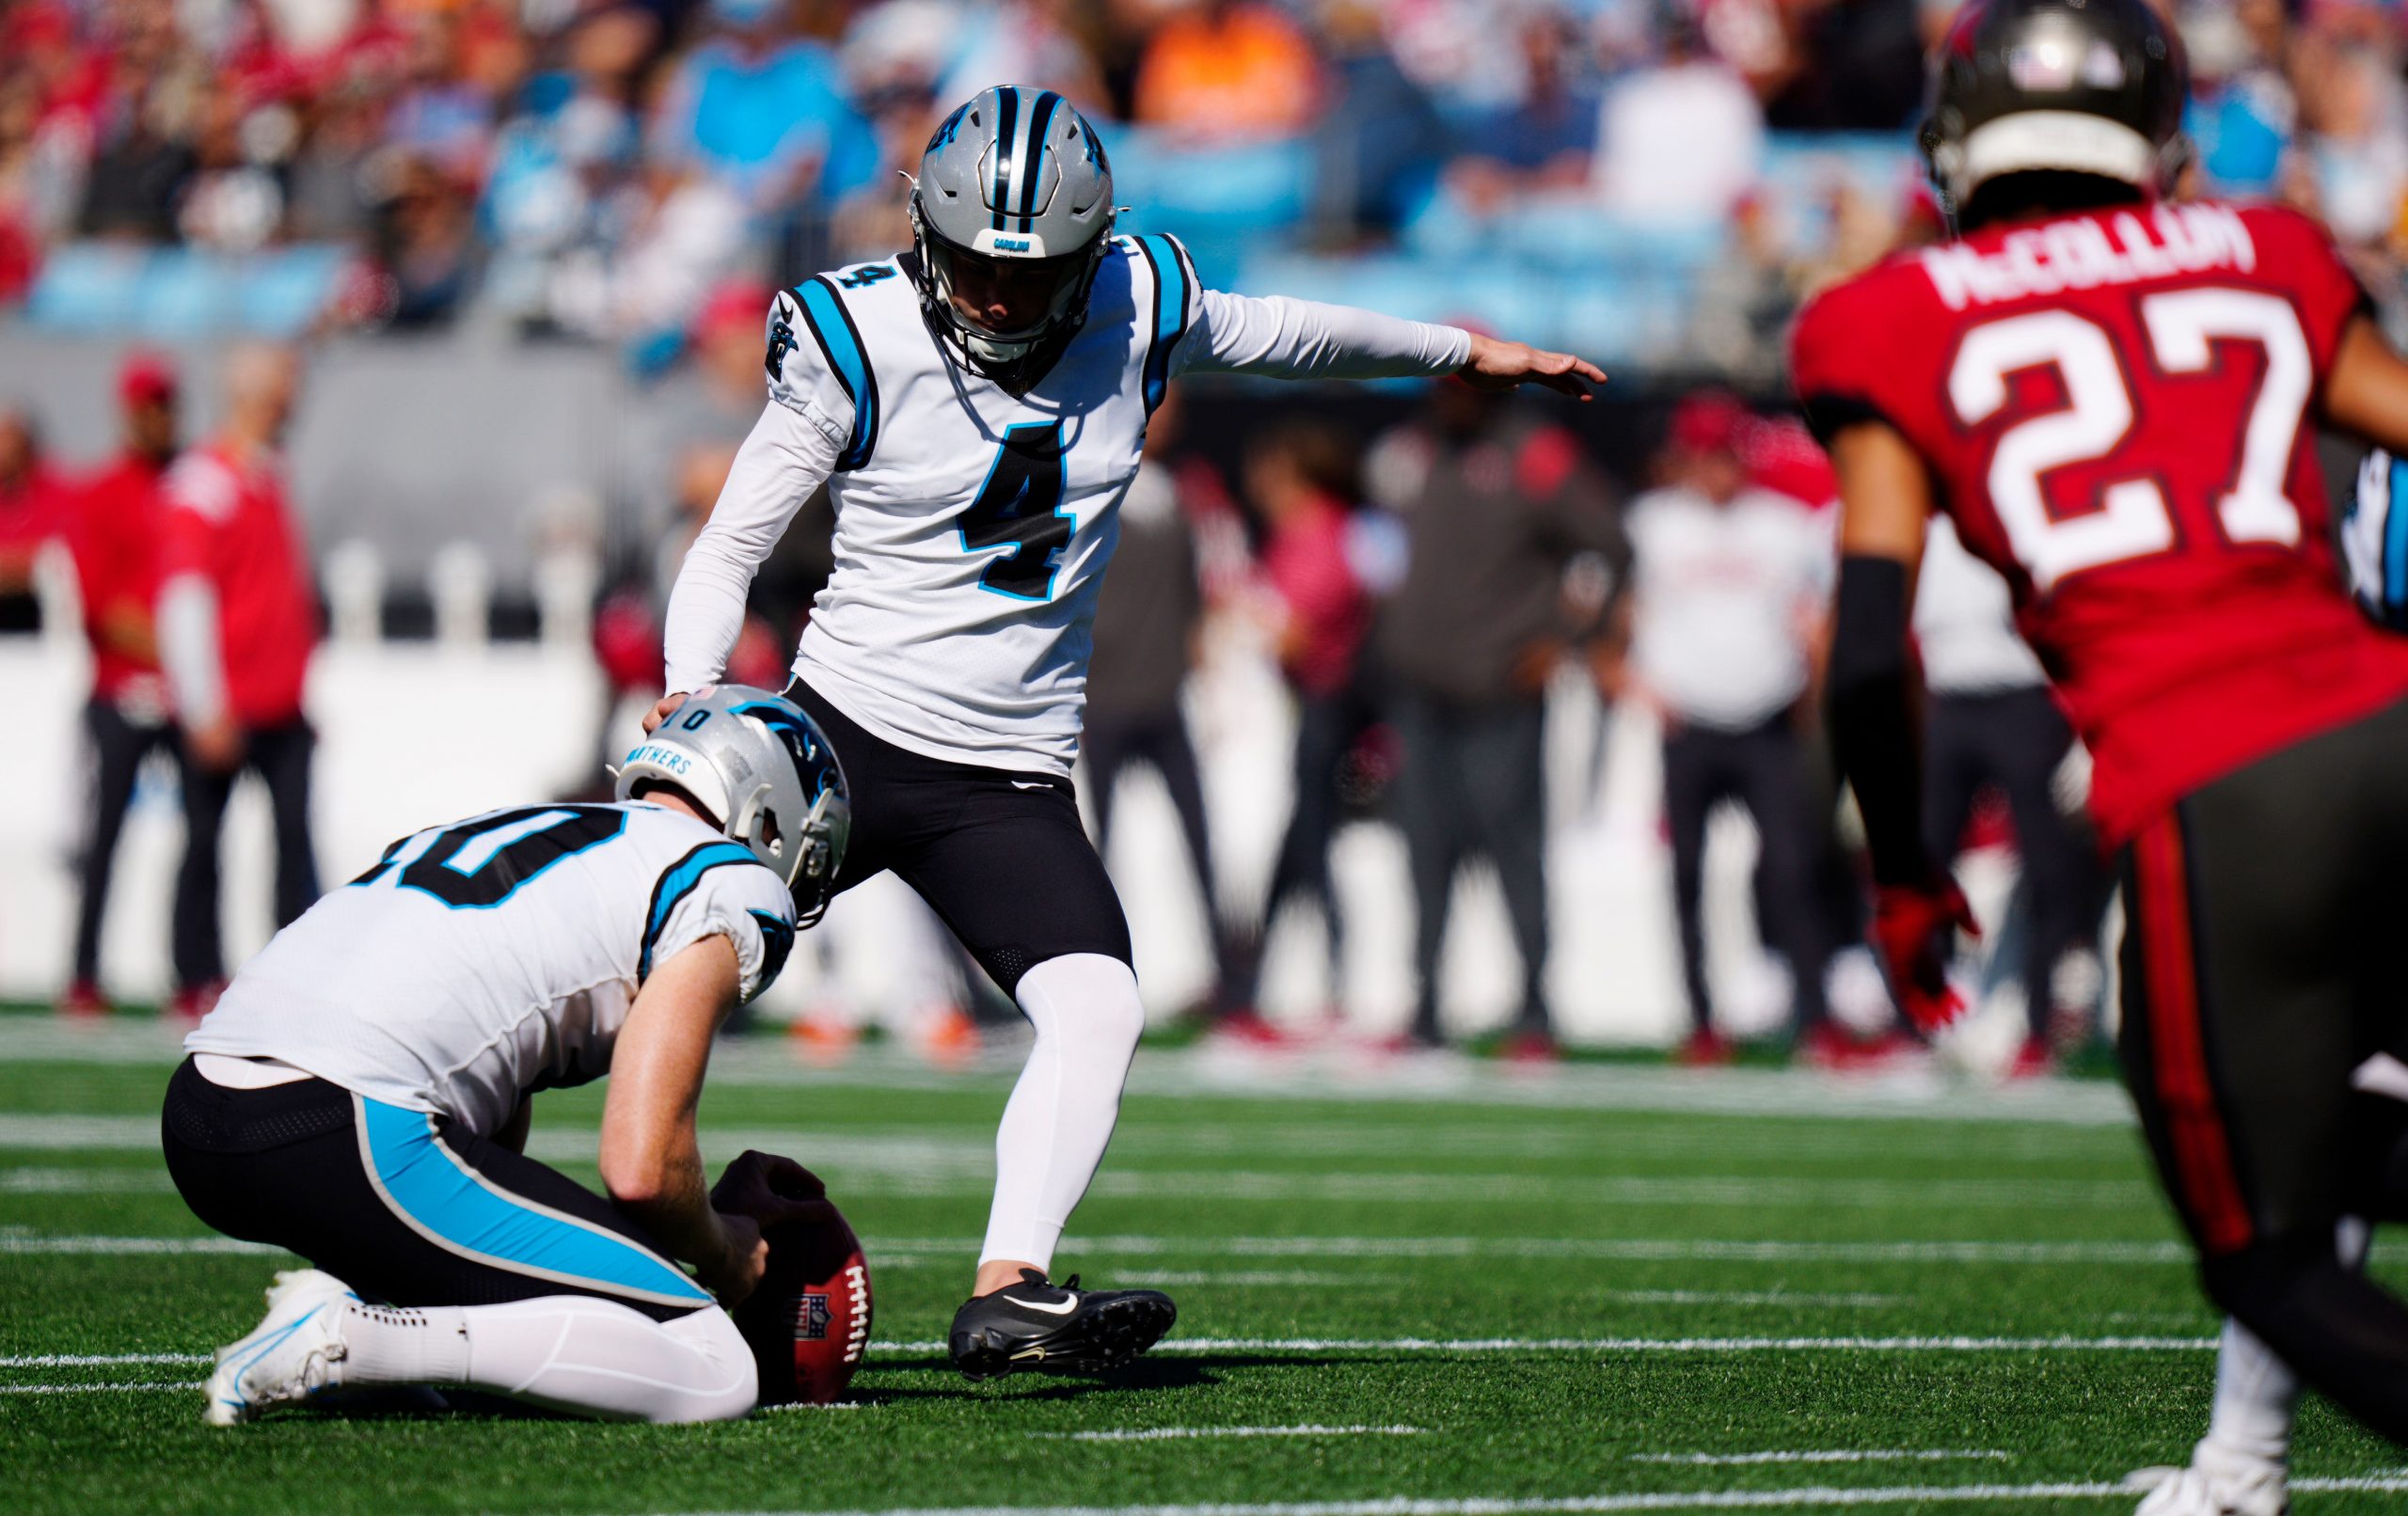 Eddy Pineiro’s misses FG vs Atlanta Falcons, Carolina Panthers lose chance of going atop NFC South: Watch